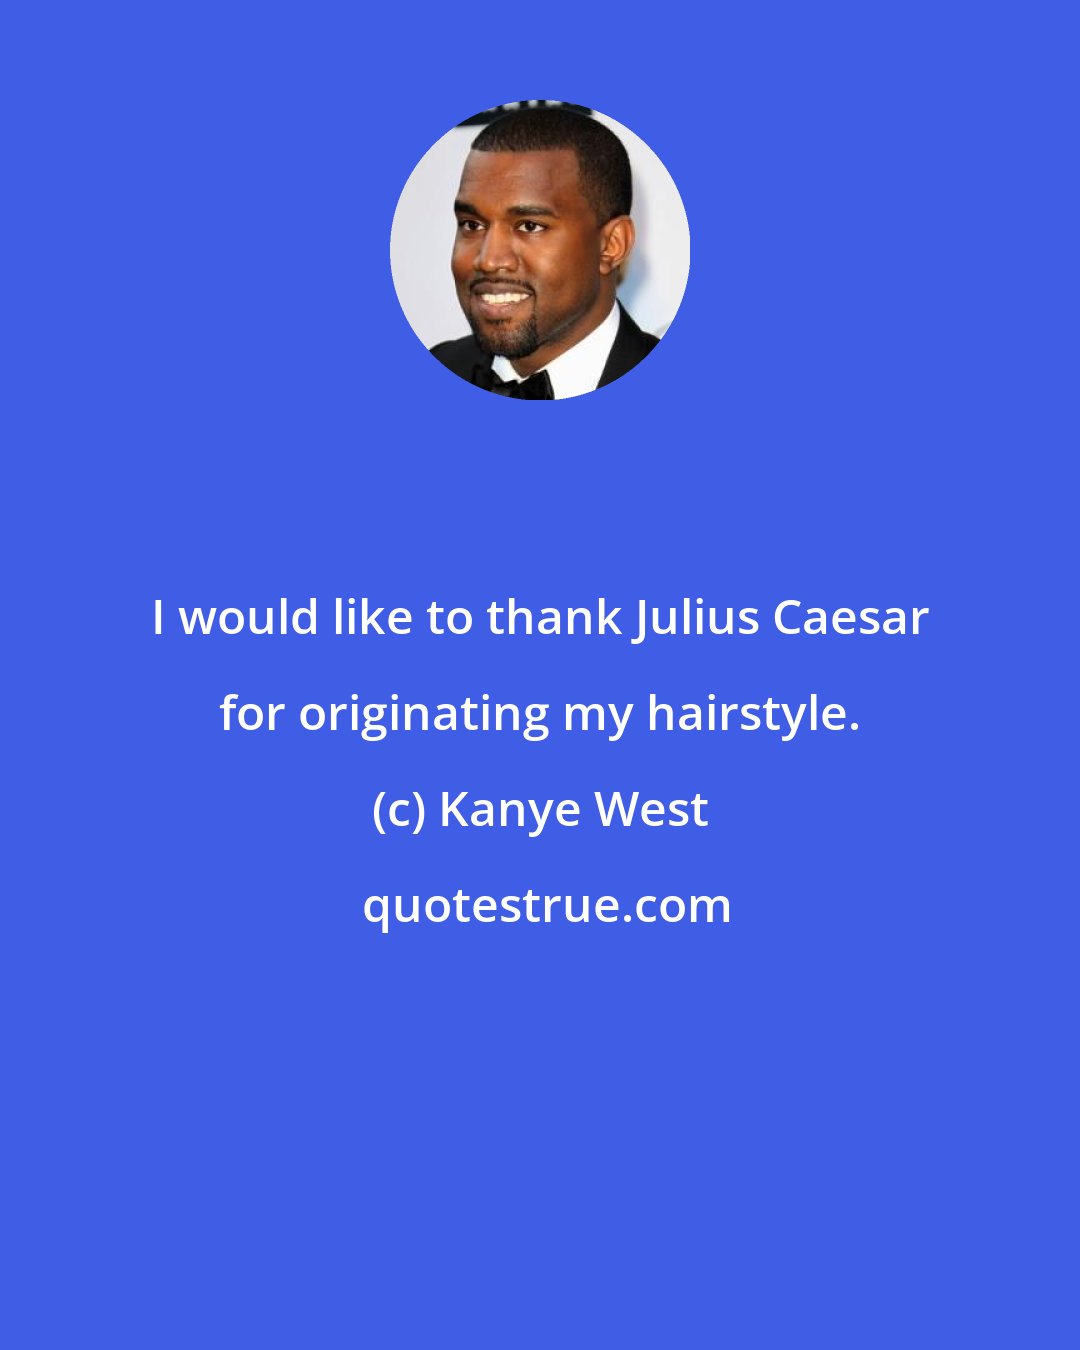 Kanye West: I would like to thank Julius Caesar for originating my hairstyle.